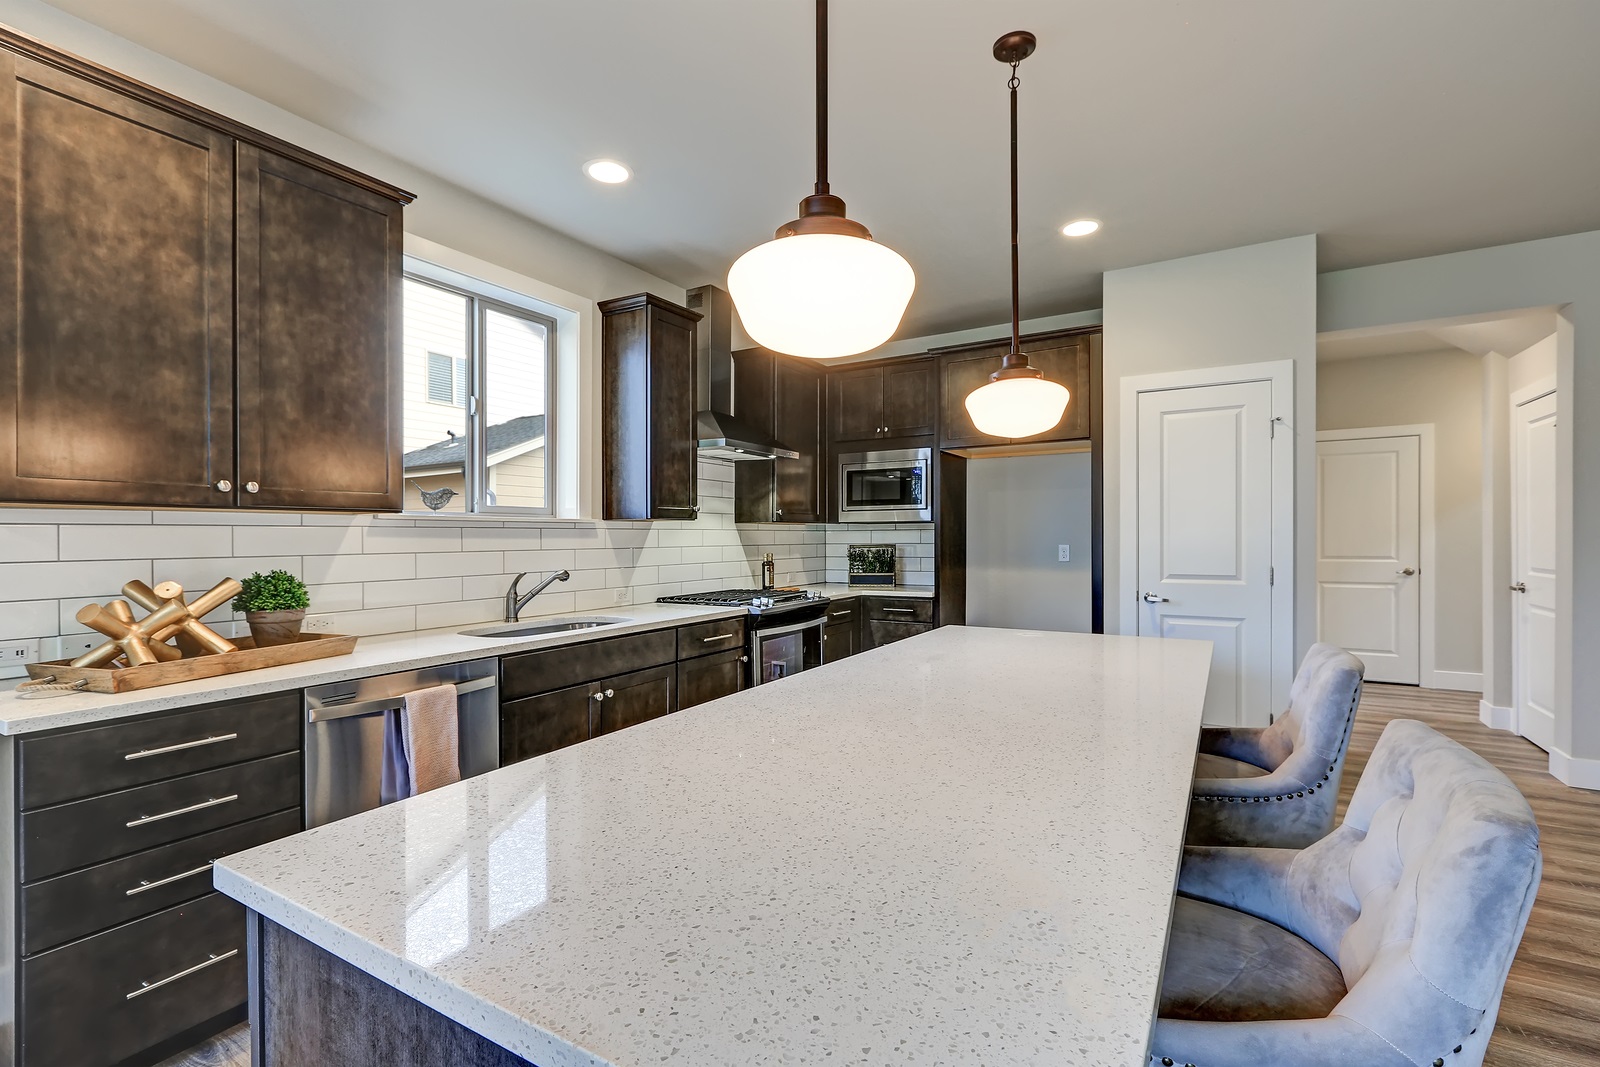 Quartz Countertops: Eco-friendly With A Touch Of Class And Glamour